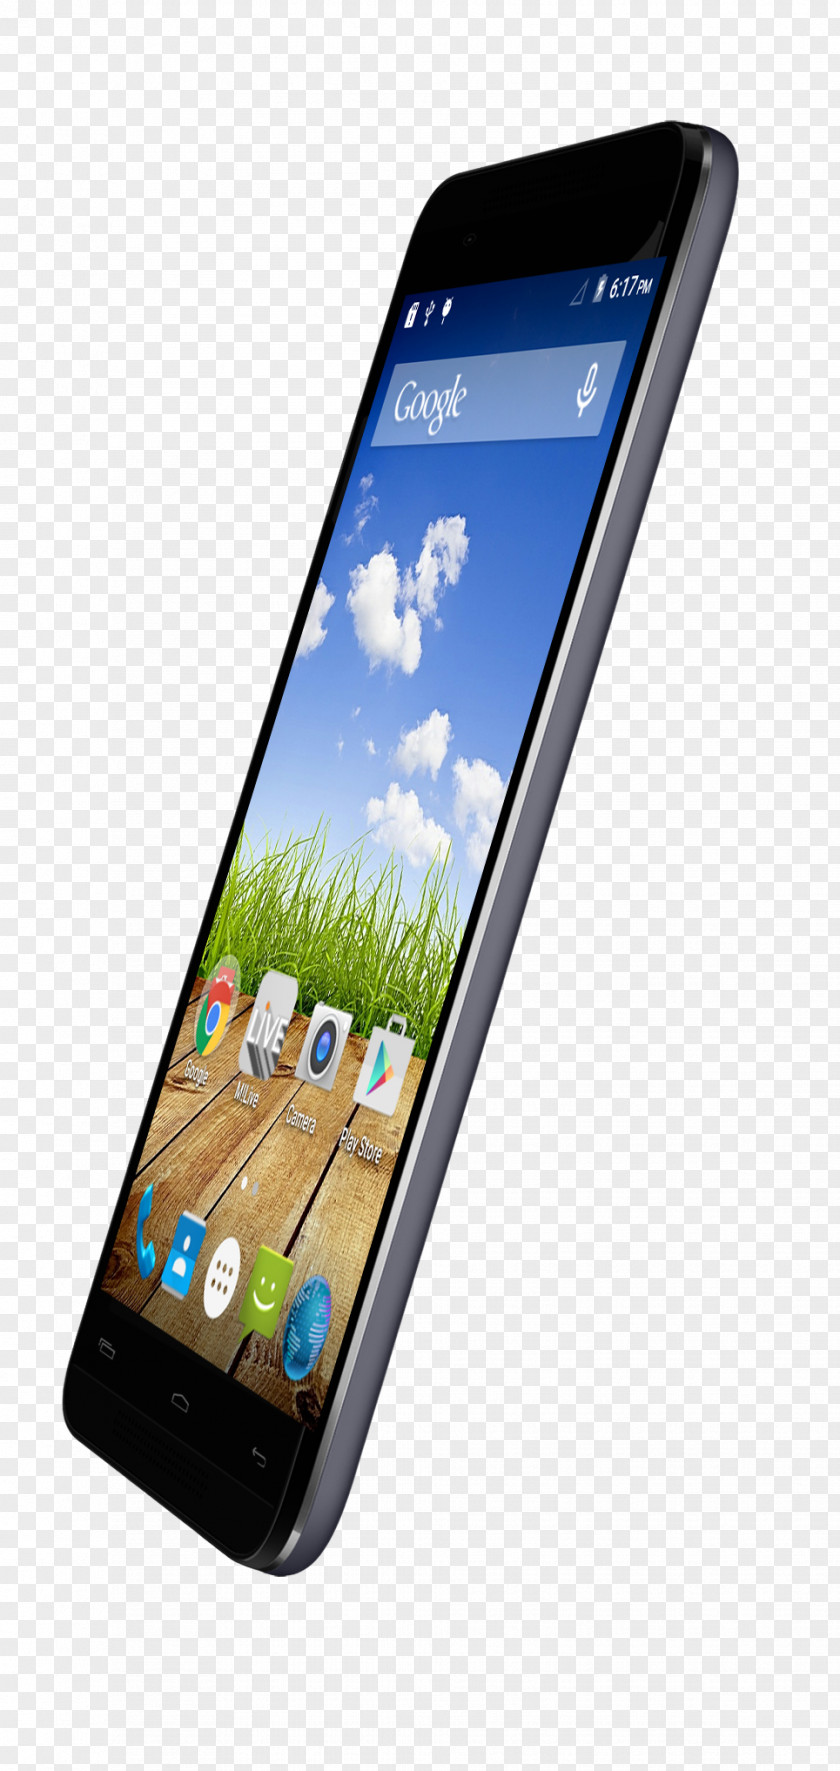 Smartphone Micromax Informatics Telephone Canvas Infinity Samsung A107 PNG